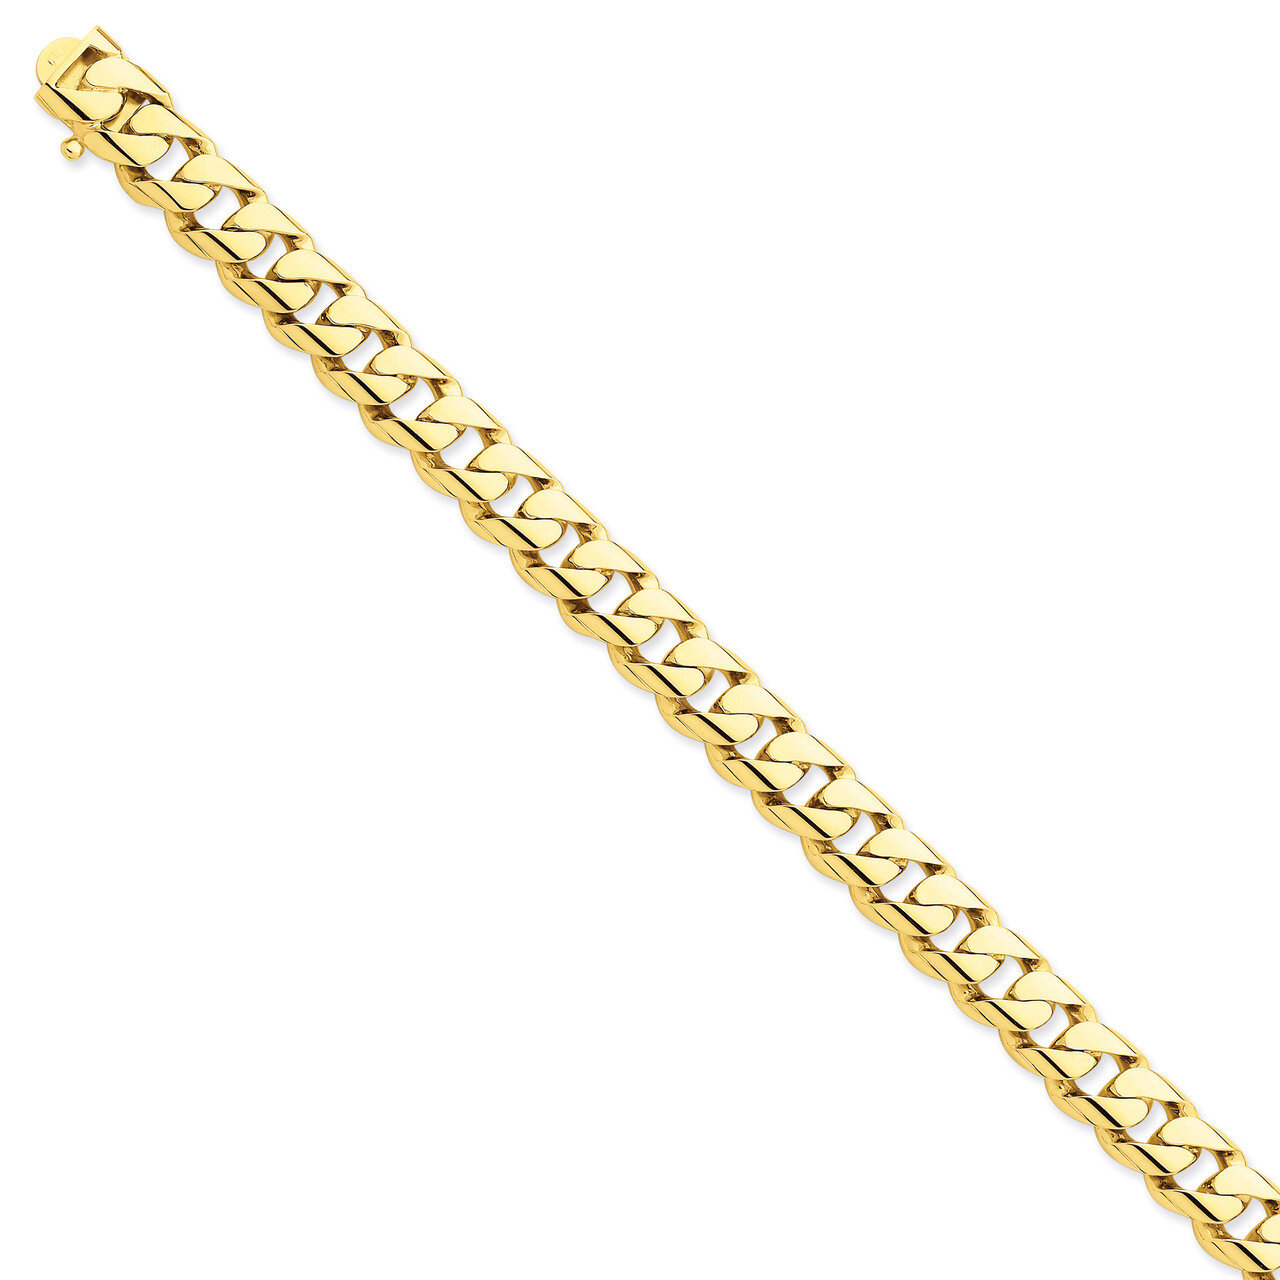 10mm Hand-polished Rounded Curb Link Chain 22 Inch 14k Gold LK126-22